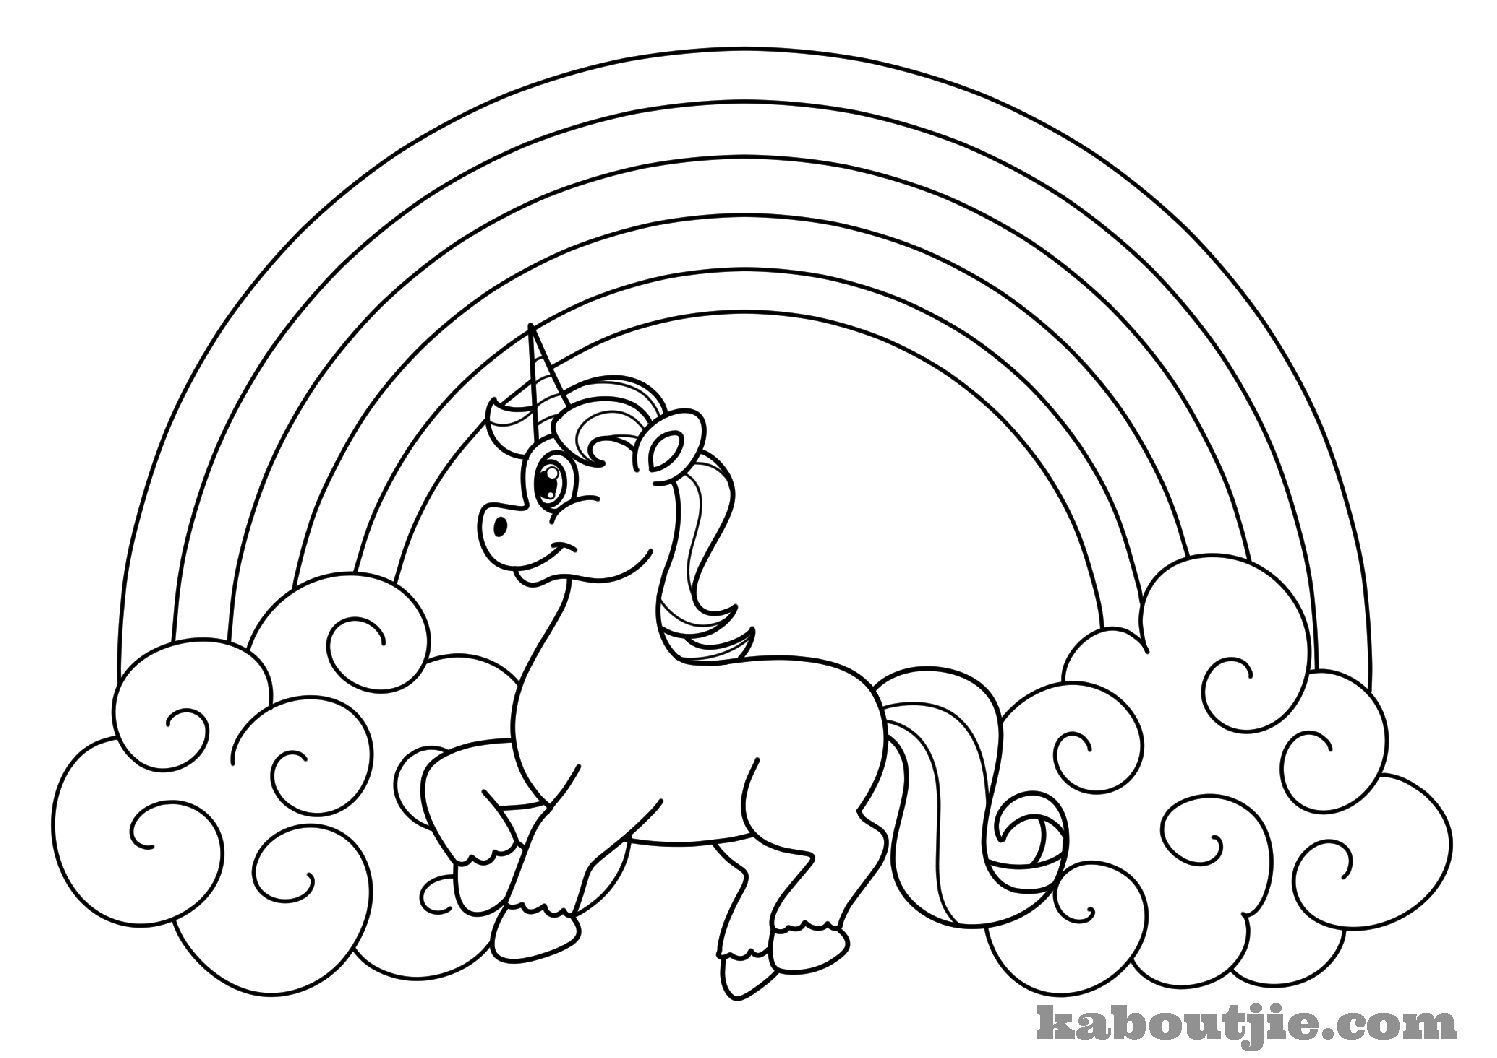 Unicorn Coloring Pages Online Collection Printable Unicorn Coloring Pages Pictures Sabadaphnecottage